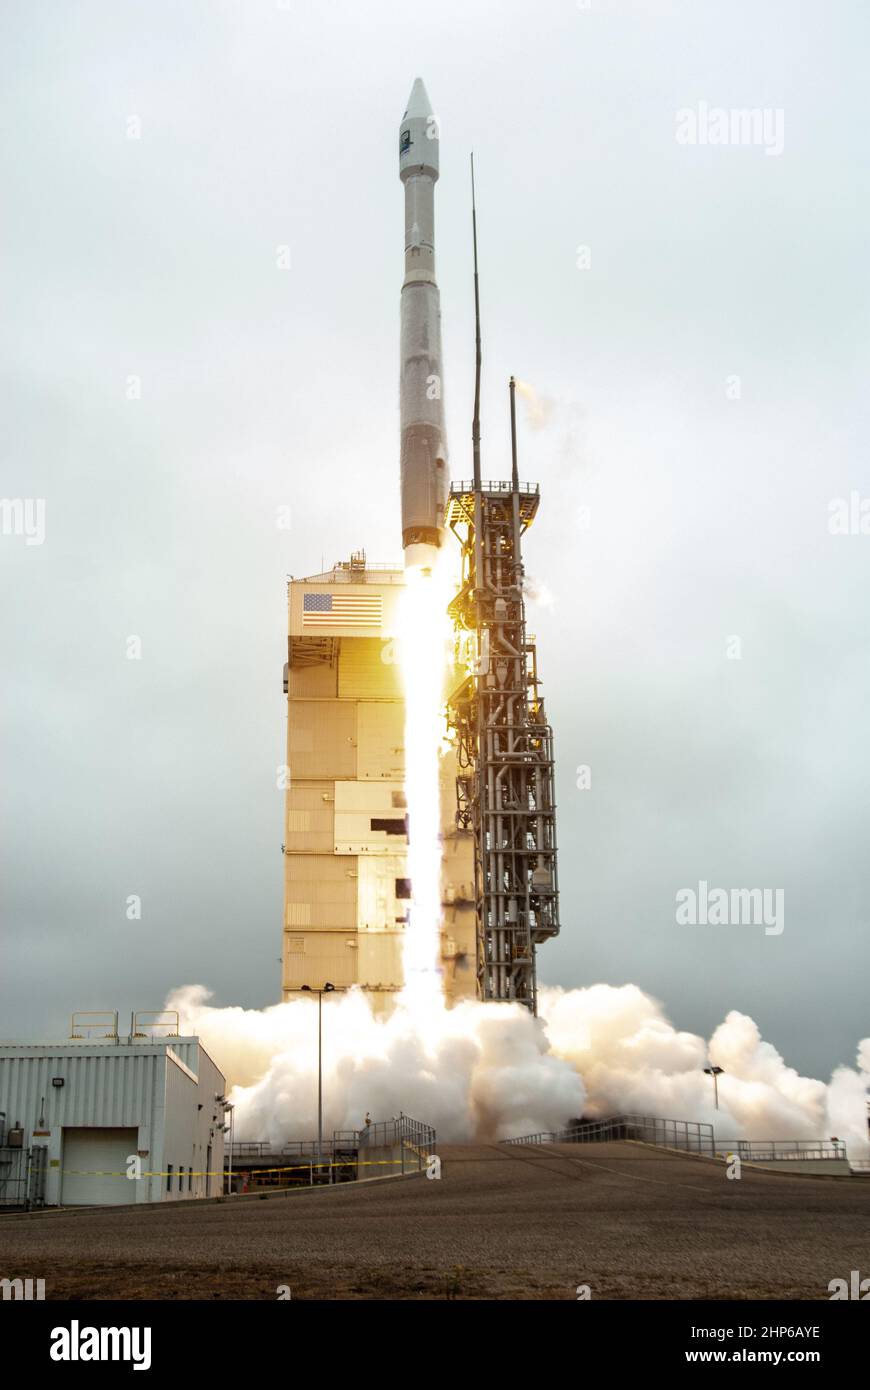 NASA’s Landsat 9 satellite launches on a United Launch Alliance Atlas V 401 rocket from Space Launch Complex 3 at Vandenberg Space Force Station in California on Sept. 27, 2021. Launch time was 2:11 p.m. EDT (11:11 a.m. PDT). The launch is managed by NASA’s Launch Services Program, based at the agency’s Kennedy Space Center in Florida. Landsat 9 will join its sister satellite, Landsat 8, in orbit in collecting images from across the planet every eight days. This calibrated data will continue the Landsat program’s critical role in monitoring the health of Earth and helping people manage essenti Stock Photo